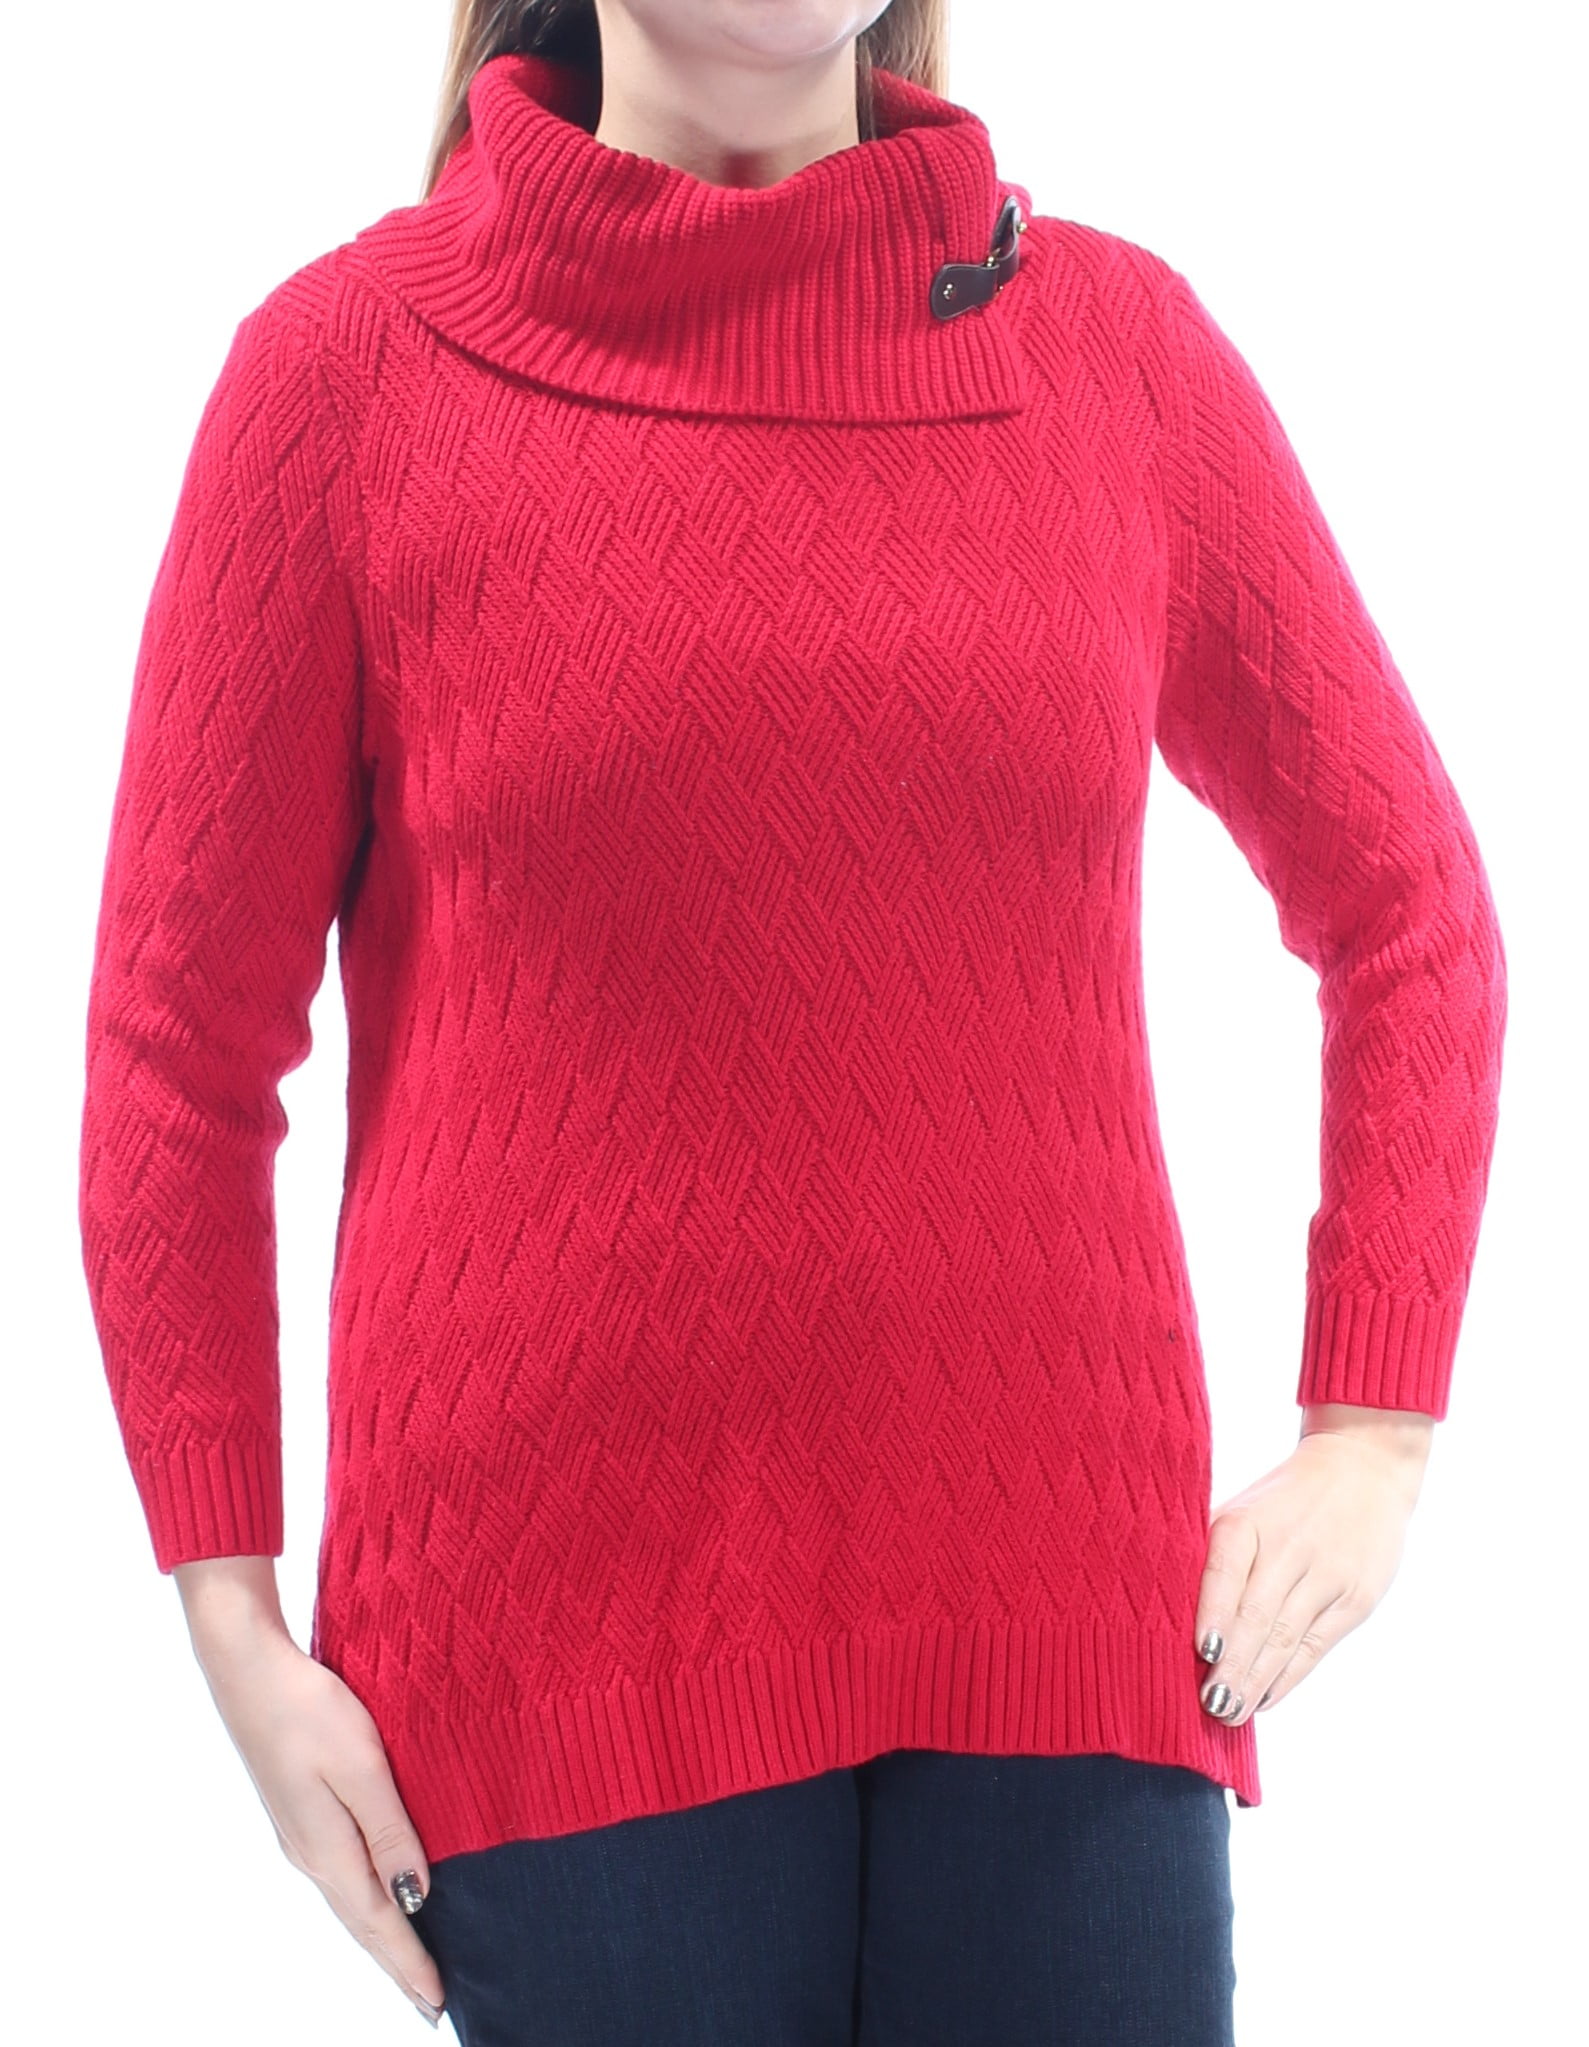 Charter Club - CHARTER CLUB $69 Womens New 1744 Red Turtle Neck 3/4 ...